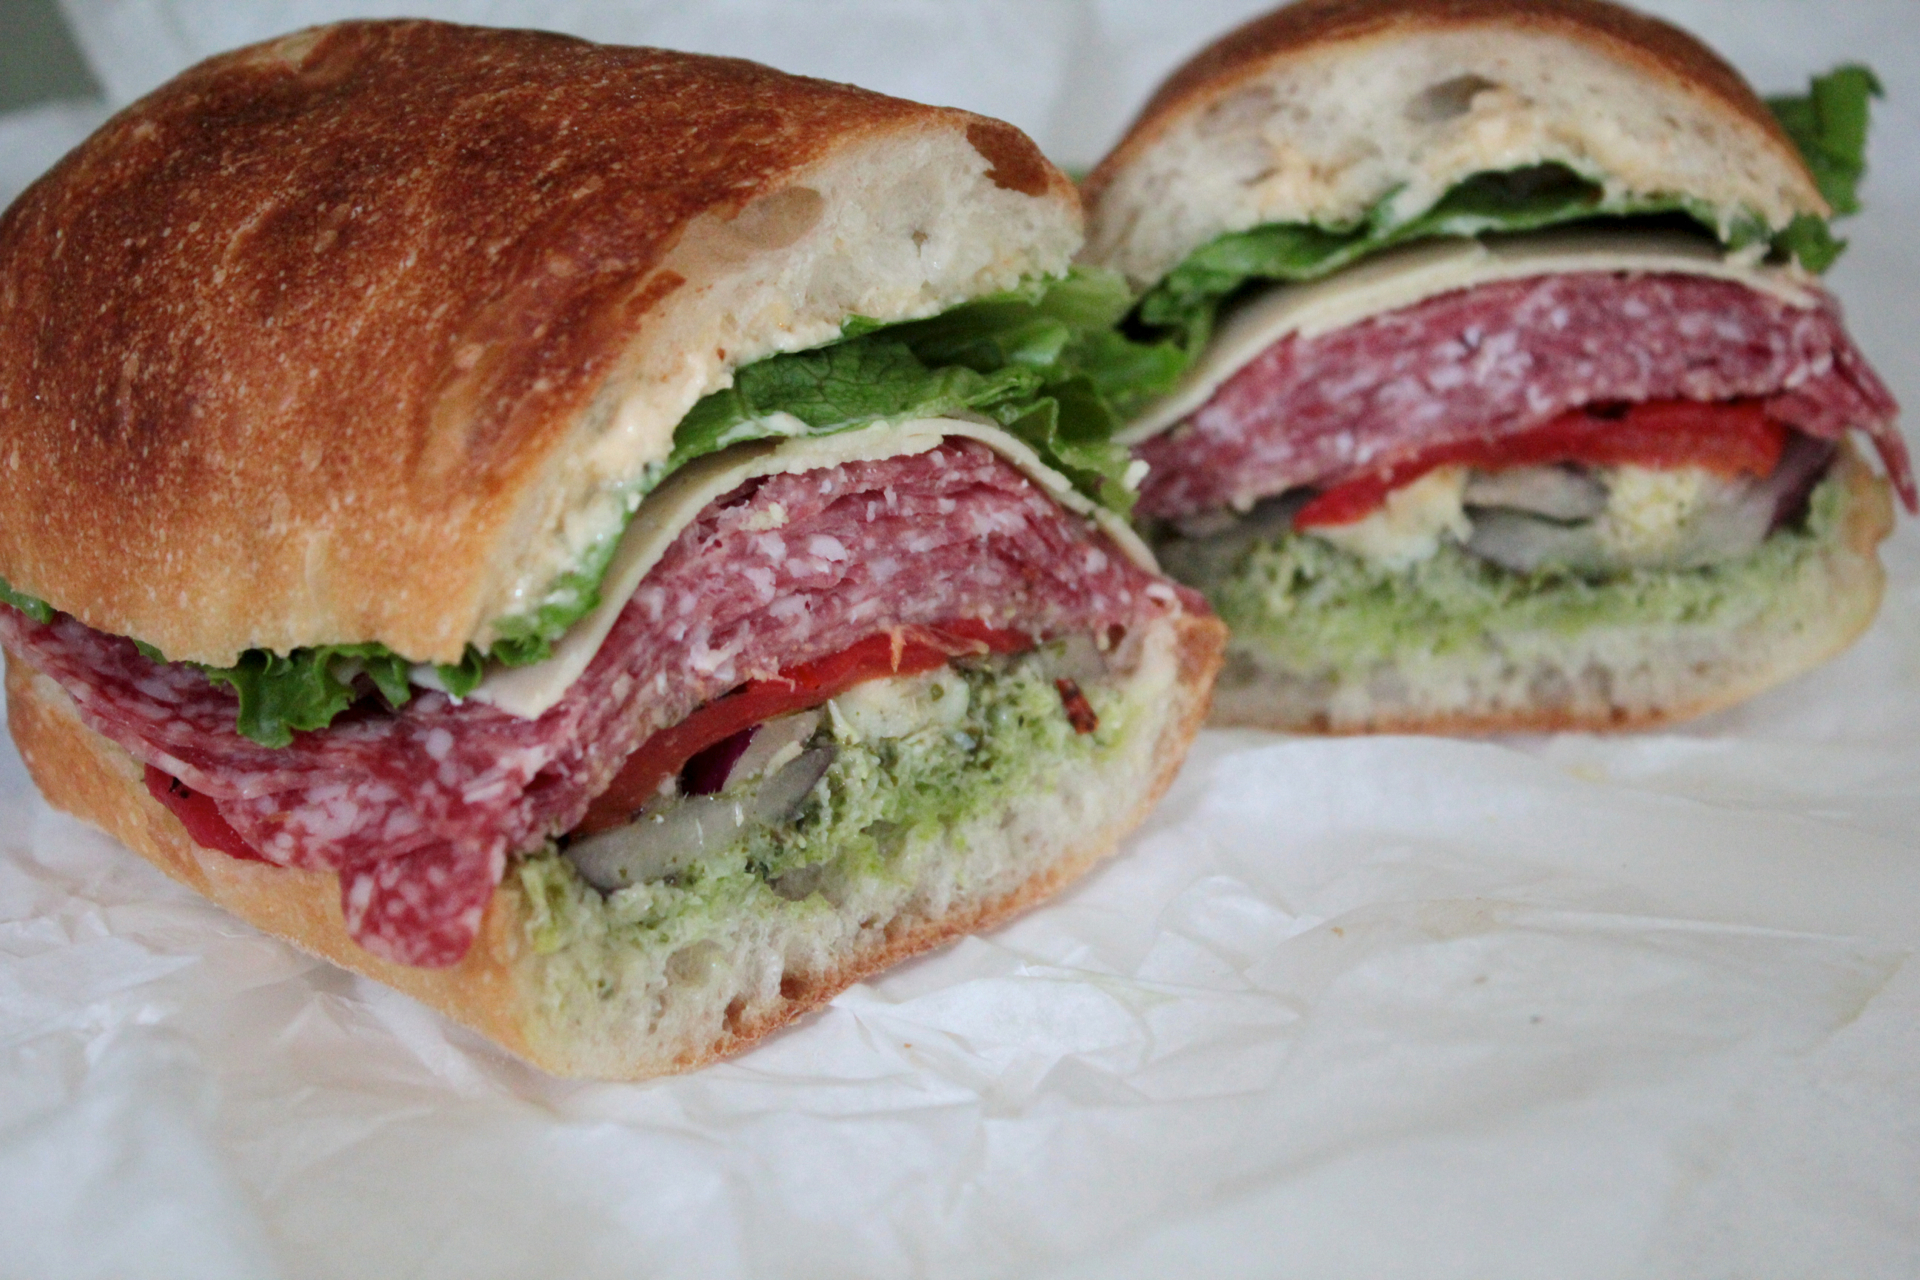 The Woodside Grand Champion features salami, artichoke hearts, red onions, red bell peppers, asiago and pesto.